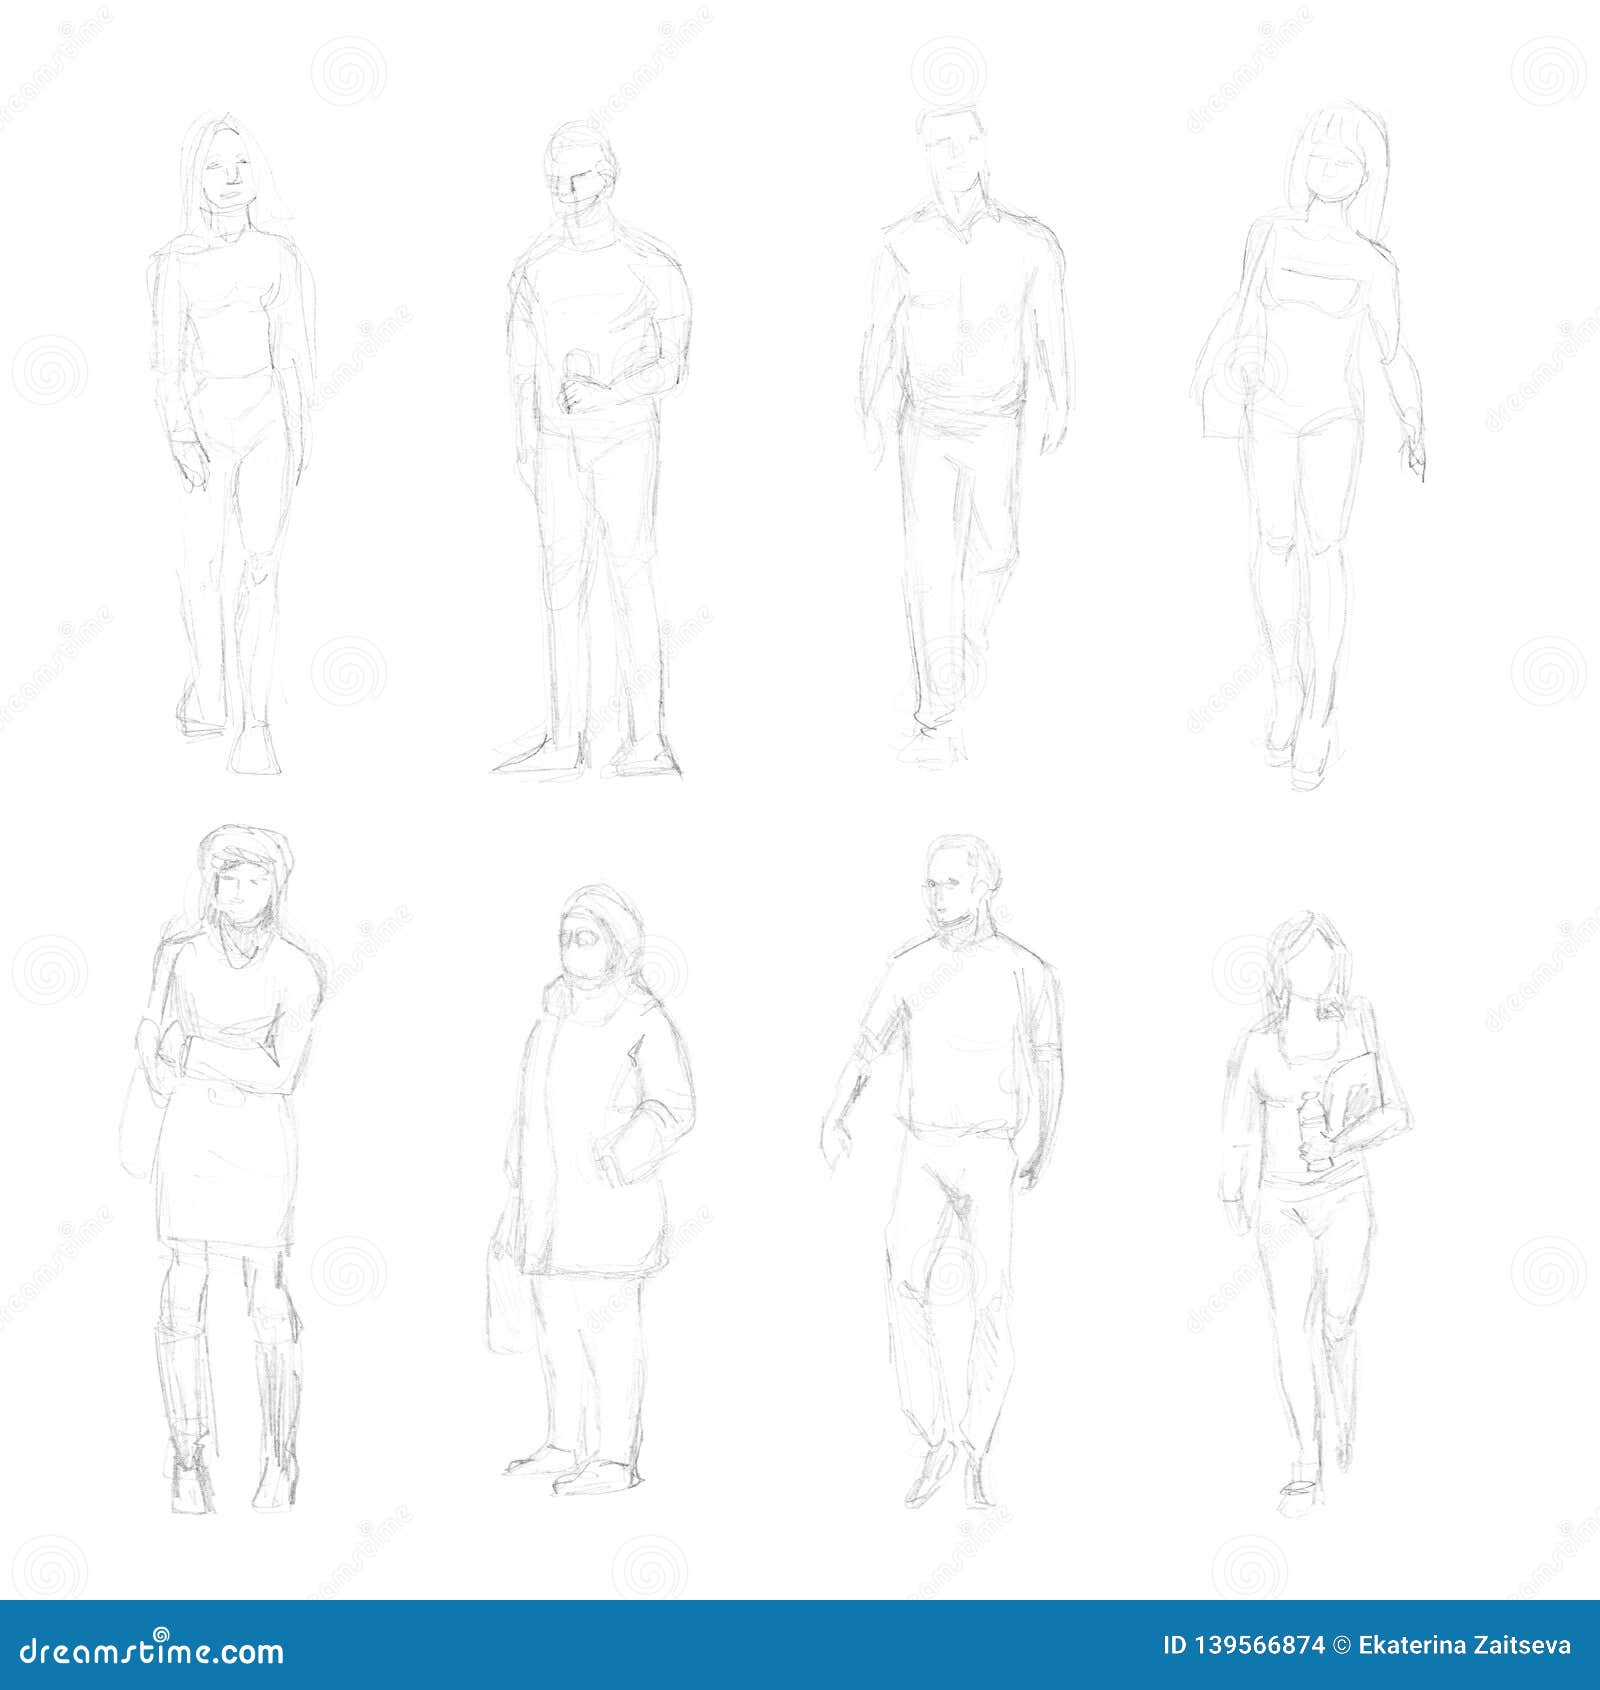 How to Draw Cartoon People Figures Moving in Different Movements and  Actions Drawing Lesson - How to Draw Step by Step Drawing Tutorials